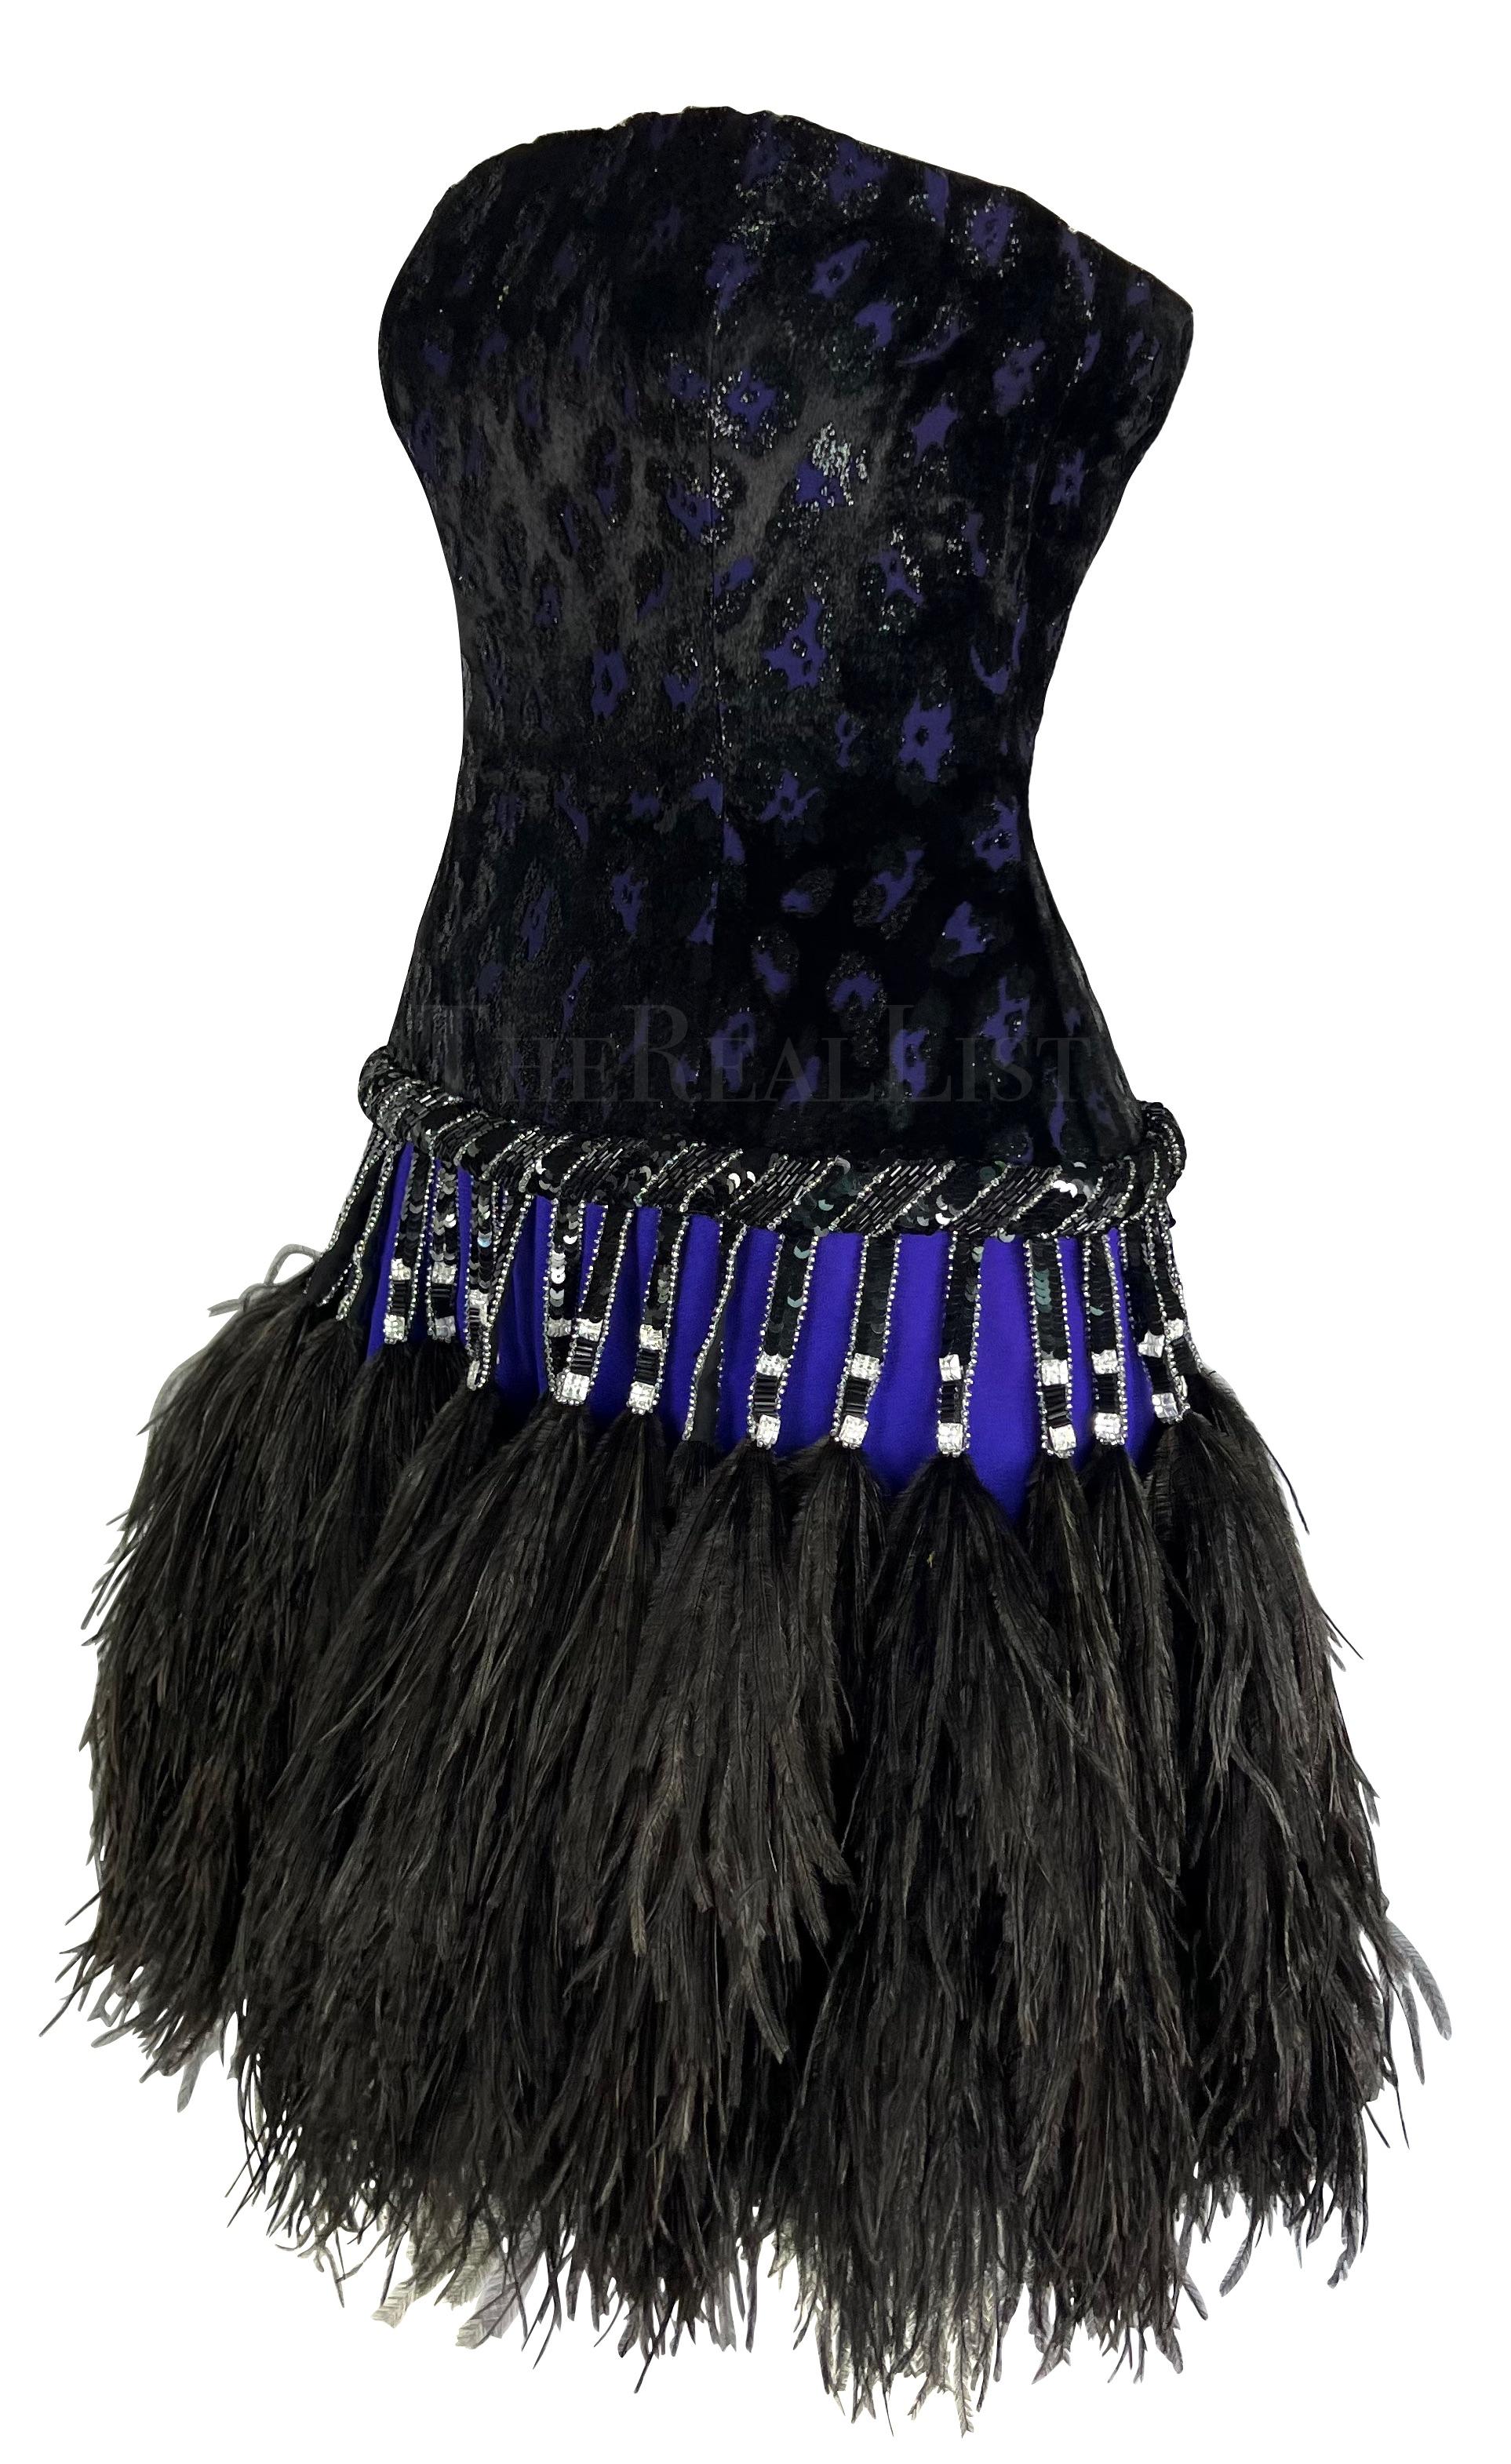 Early 1990s Bob Mackie Black Rhinestone Beaded Purple Ostrich Feather Mini Dress In Good Condition For Sale In West Hollywood, CA